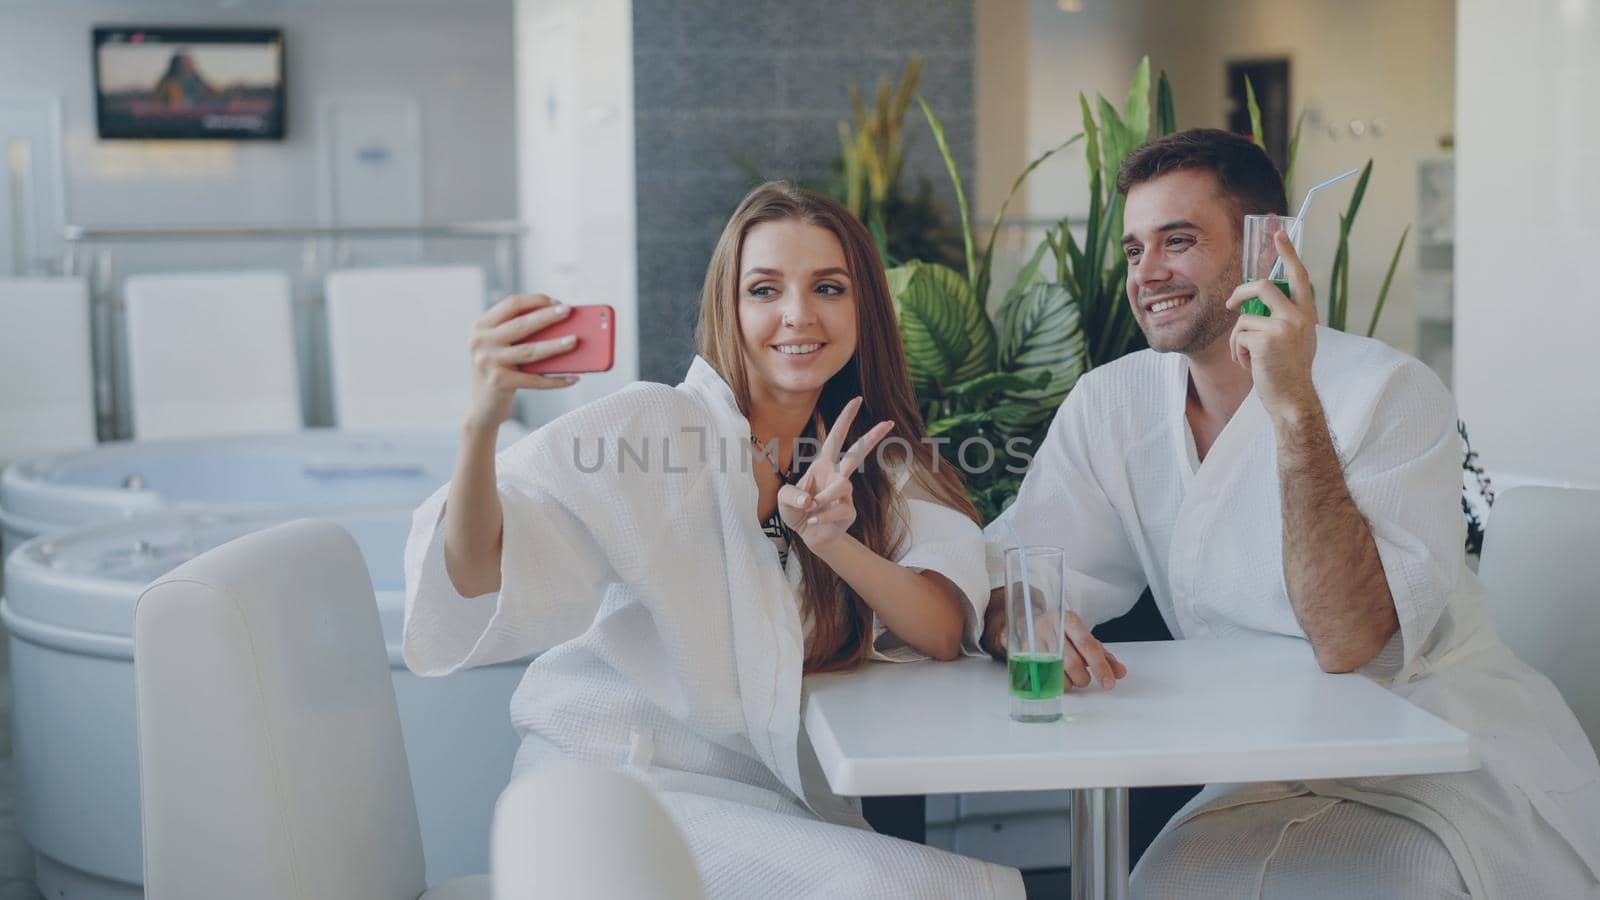 Pretty cheerful girl and her loving boyfriend are taking selfie with cocktail glasses using smartphone while relaxing in spa salon. They are smiling and posing looking at camera.